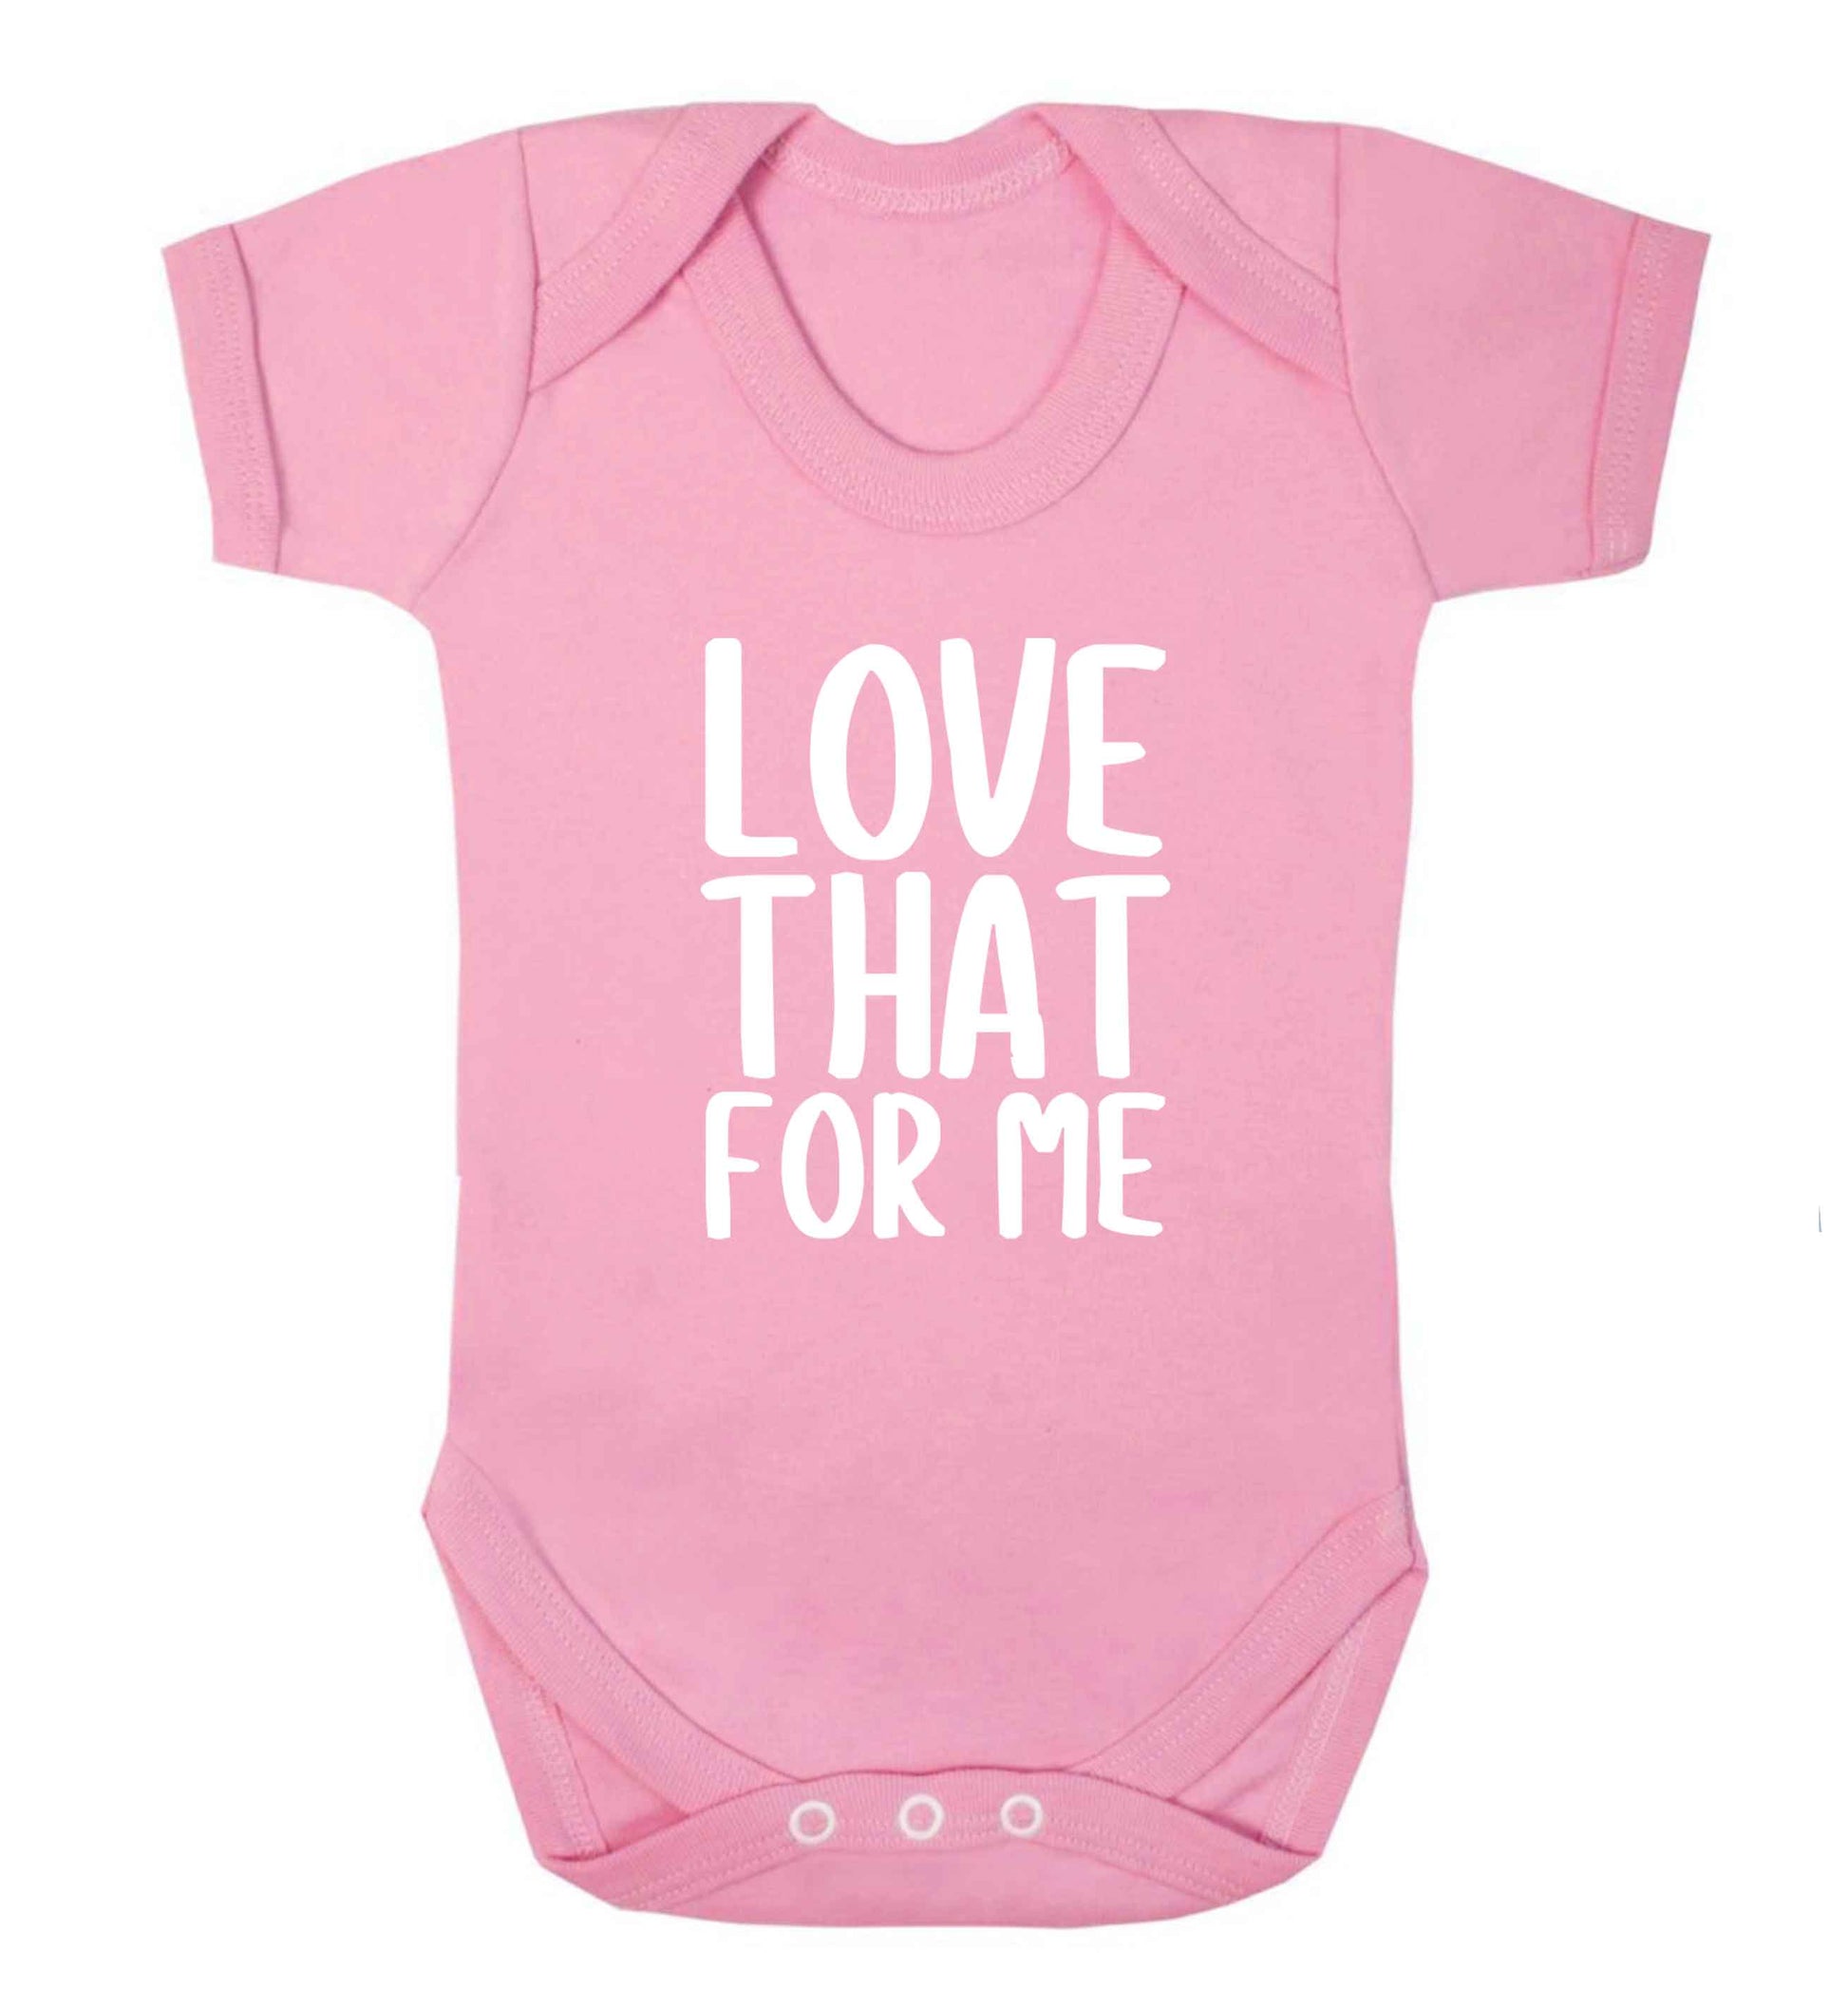 We love this for YOU! Who else loves saying this?!  baby vest pale pink 18-24 months